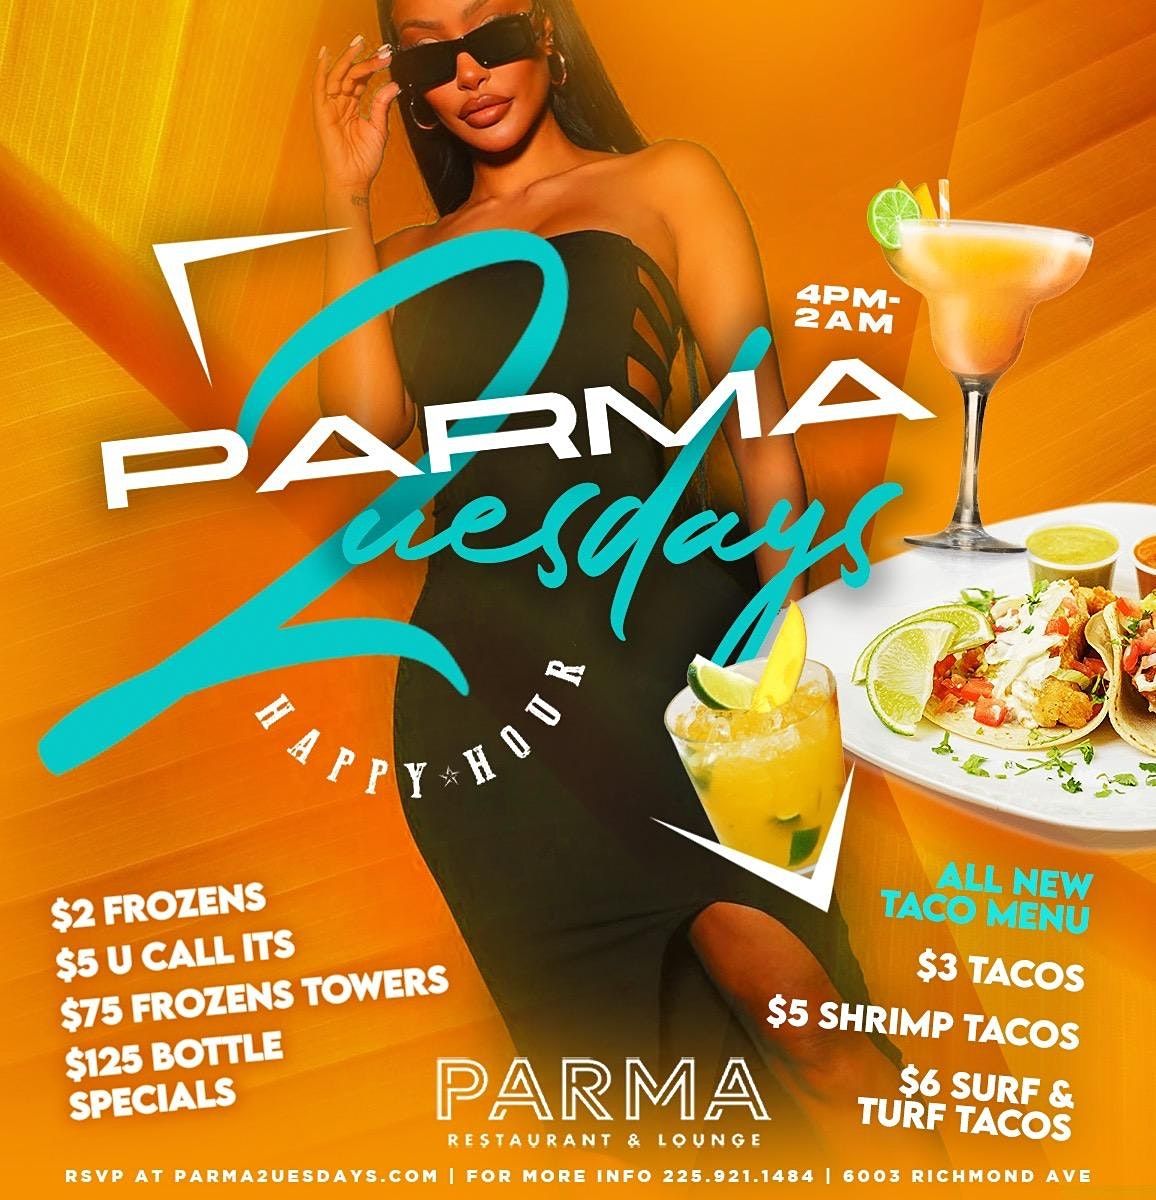 PARMA 2UESDAYS @ PARMA LOUNGE | NO COVER | FULL KITCHEN | RSVP NOW